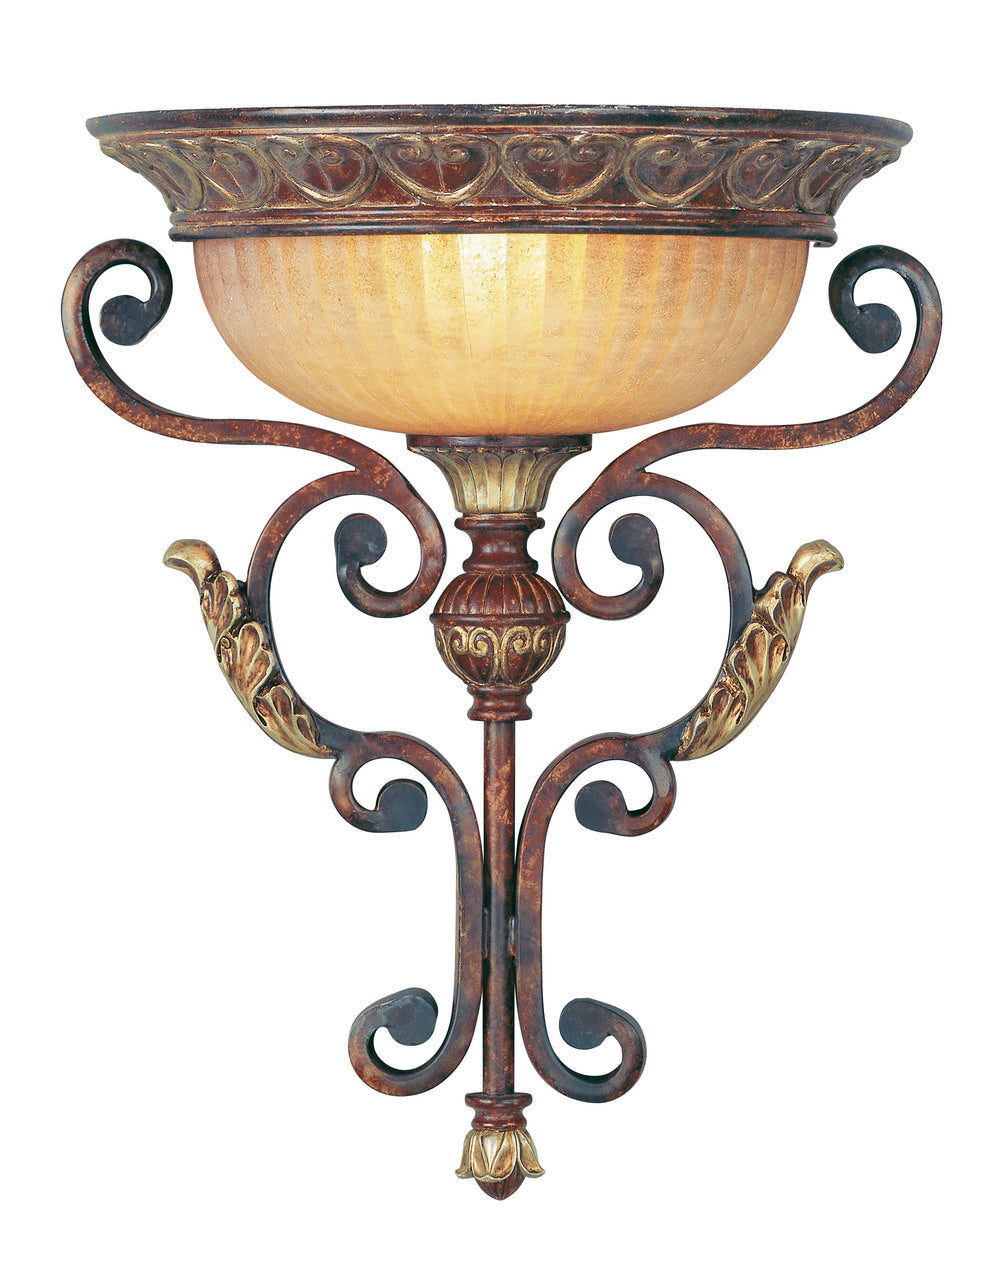 LIVEX Lighting 8580-63 Villa Verona Wall Sconce in Verona Bronze with Aged Gold Leaf Accents (1 Light)